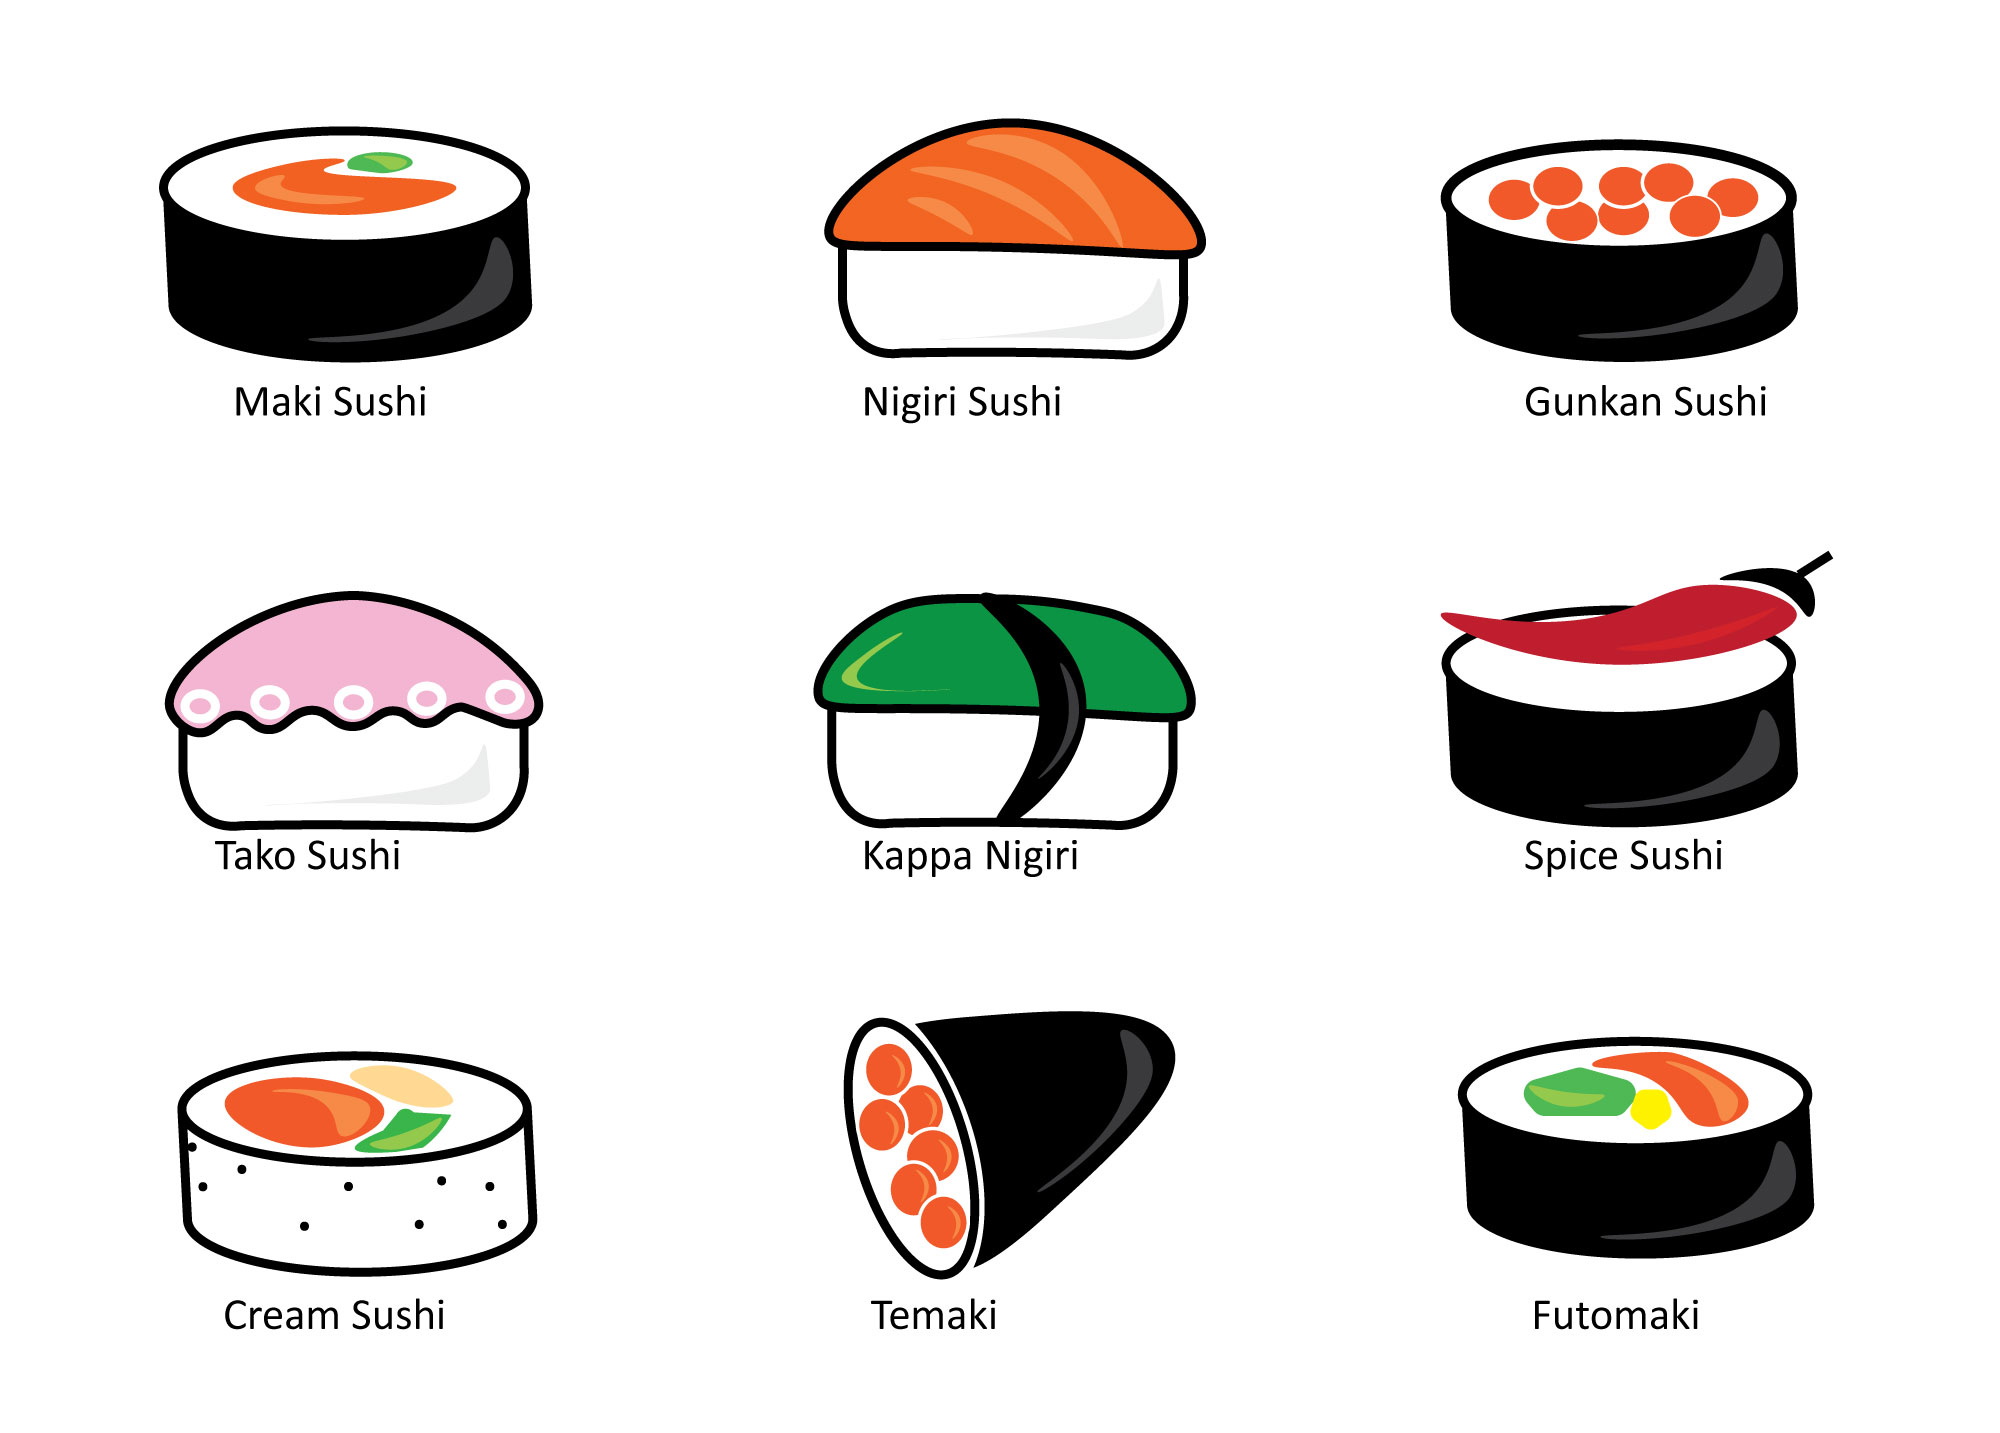  illustrations of different types of sushi